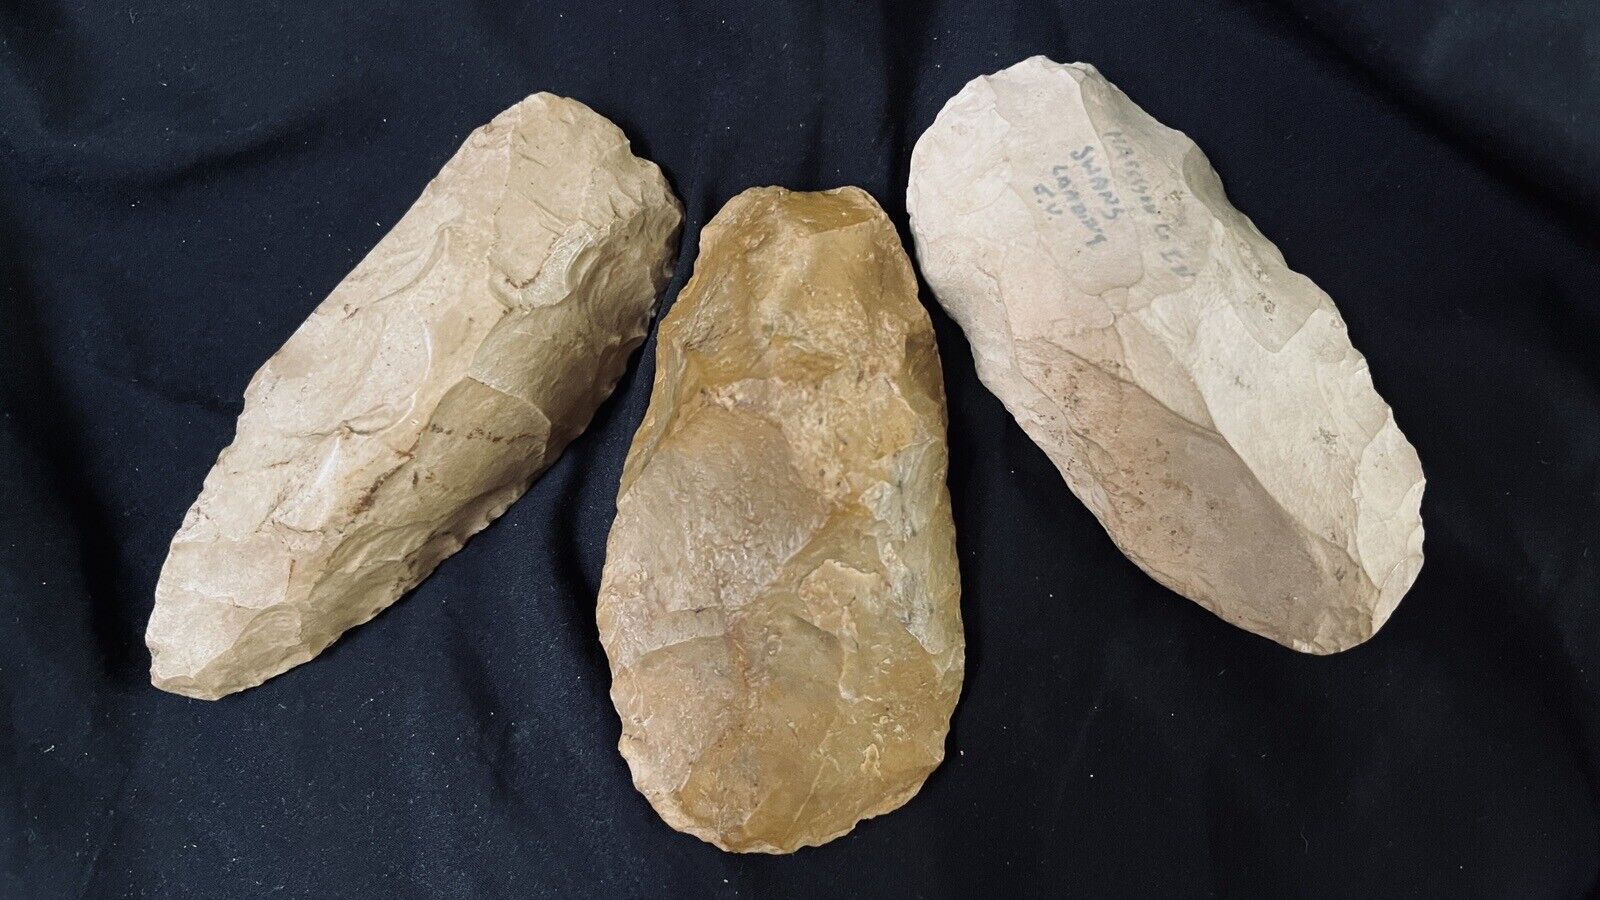 Lot Of Native American Neolithic Stone Tools, Scrapers And Knife Blade